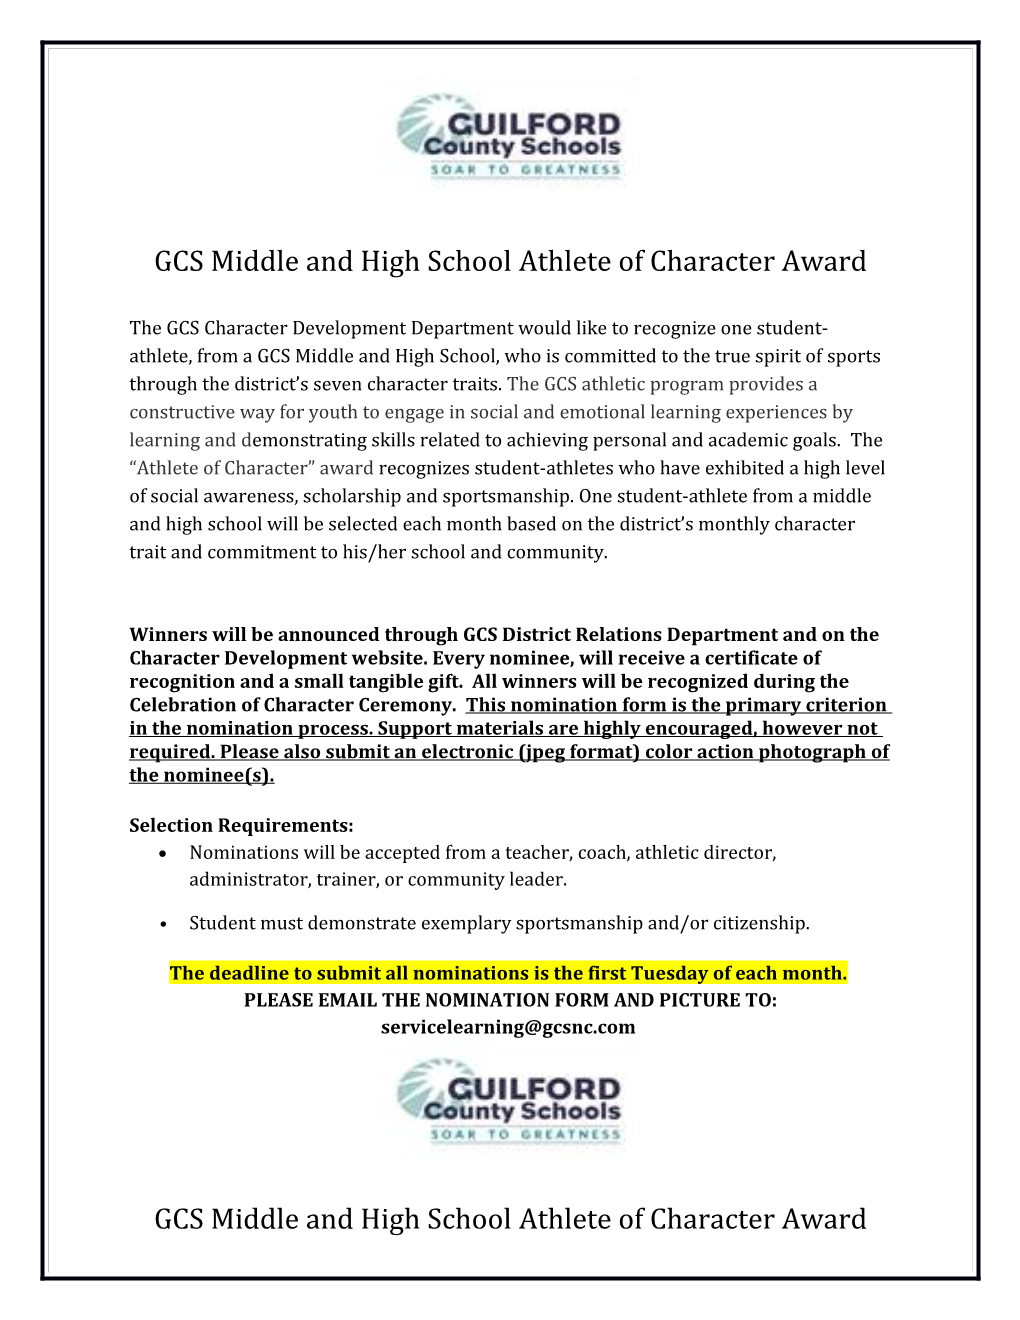 GCS Middle and High School Athlete of Character Award